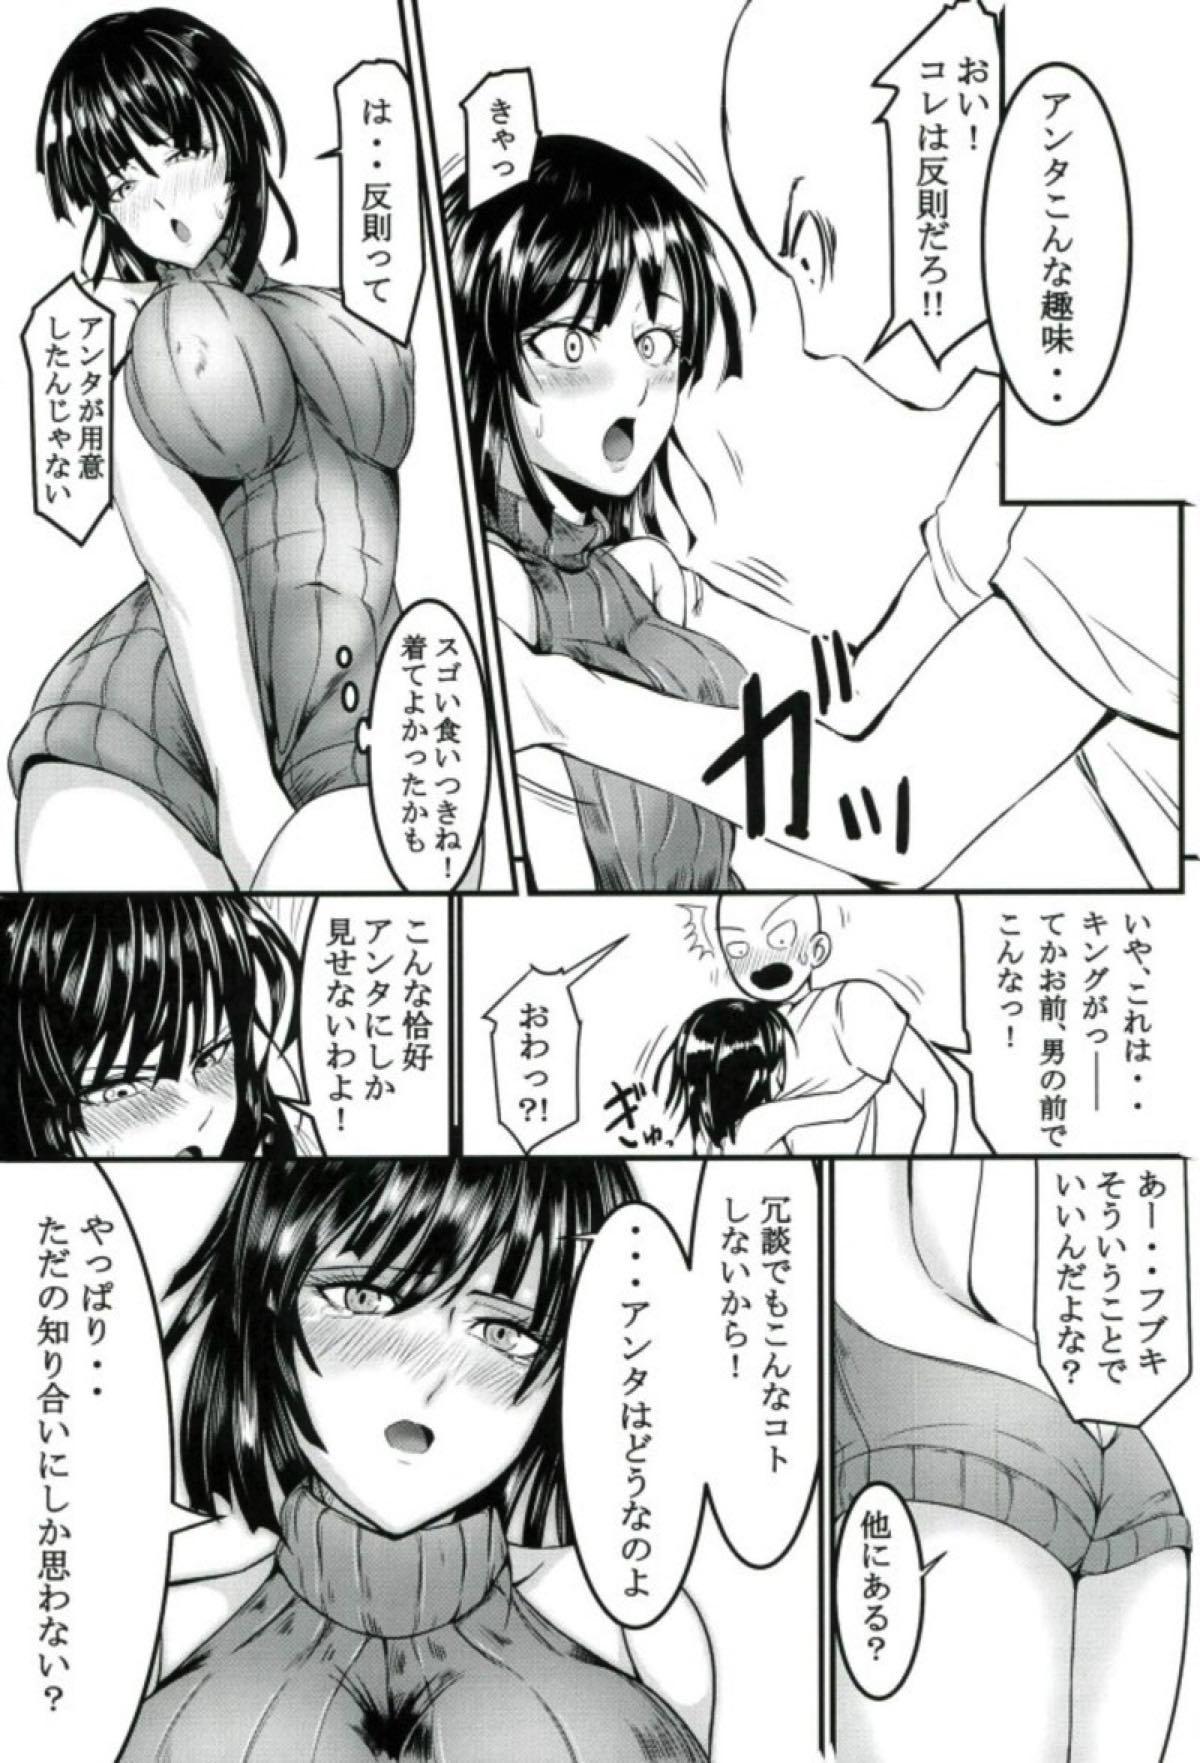 Euro Porn Dekoboko Love Sister First Love - One punch man Penis - Page 6